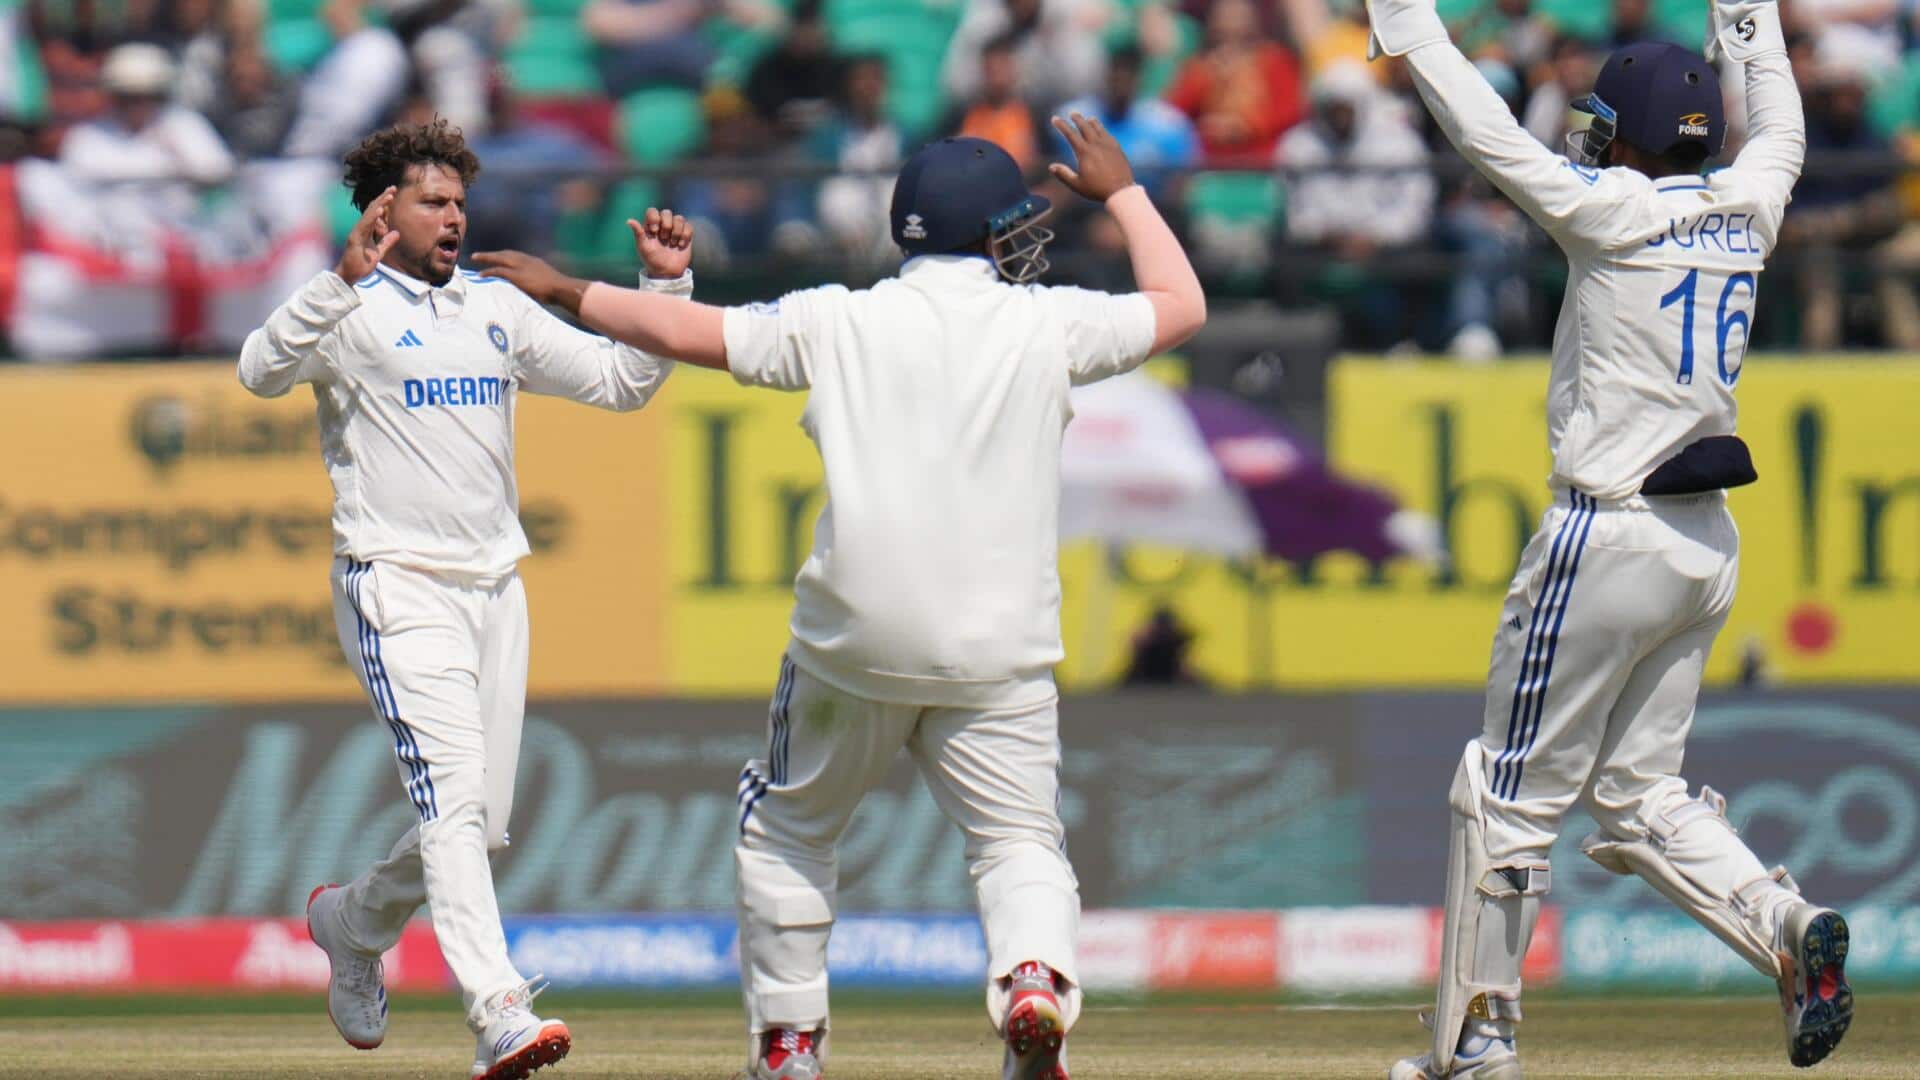 Kuldeep Yadav completes 50 Test wickets with fourth fifer: Stats